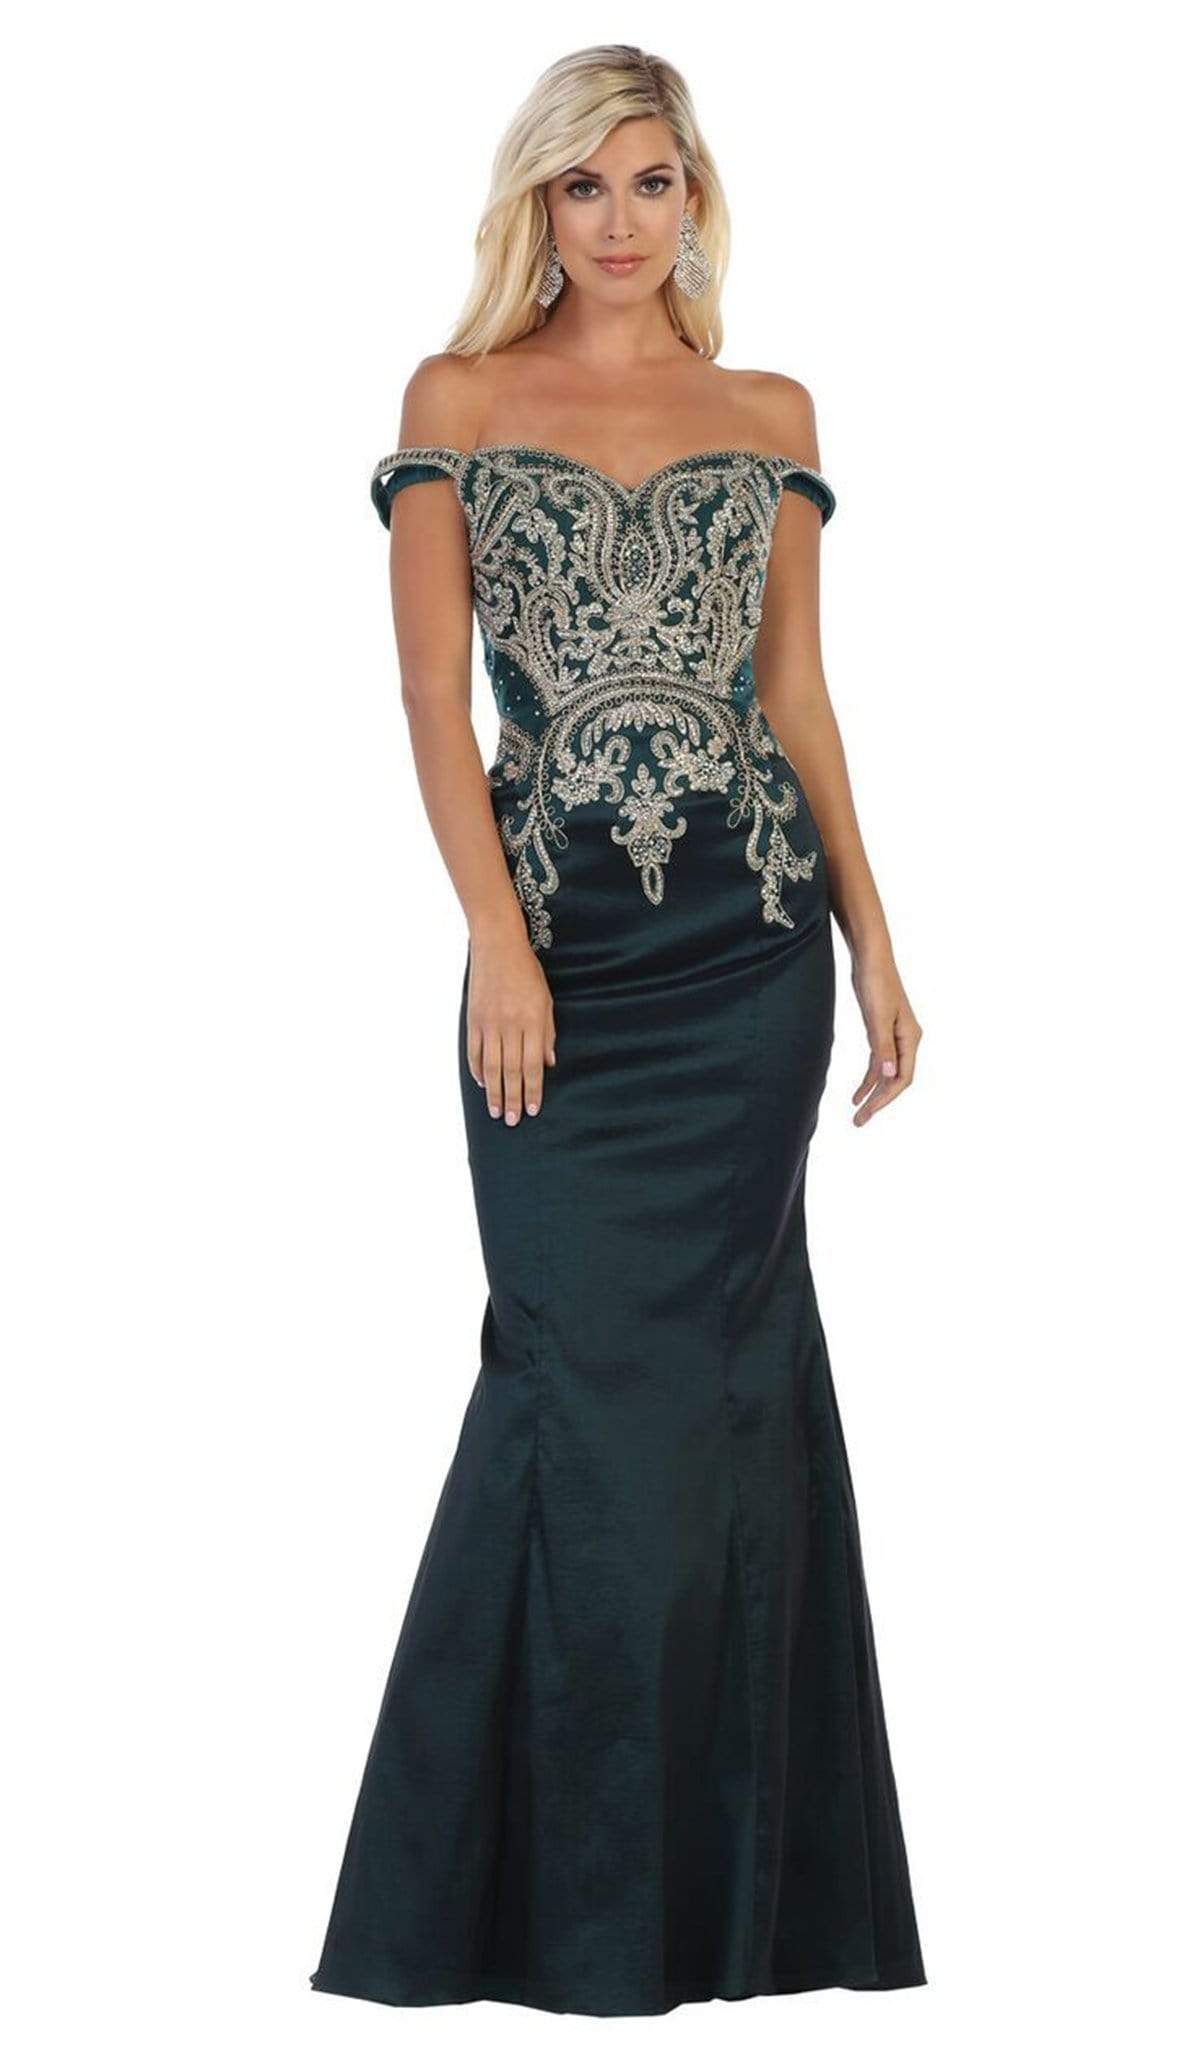 May Queen - MQ1609 Metallic Lace Appliqued Trumpet Gown Bridesmaid Dresses 4 / Hunter Green